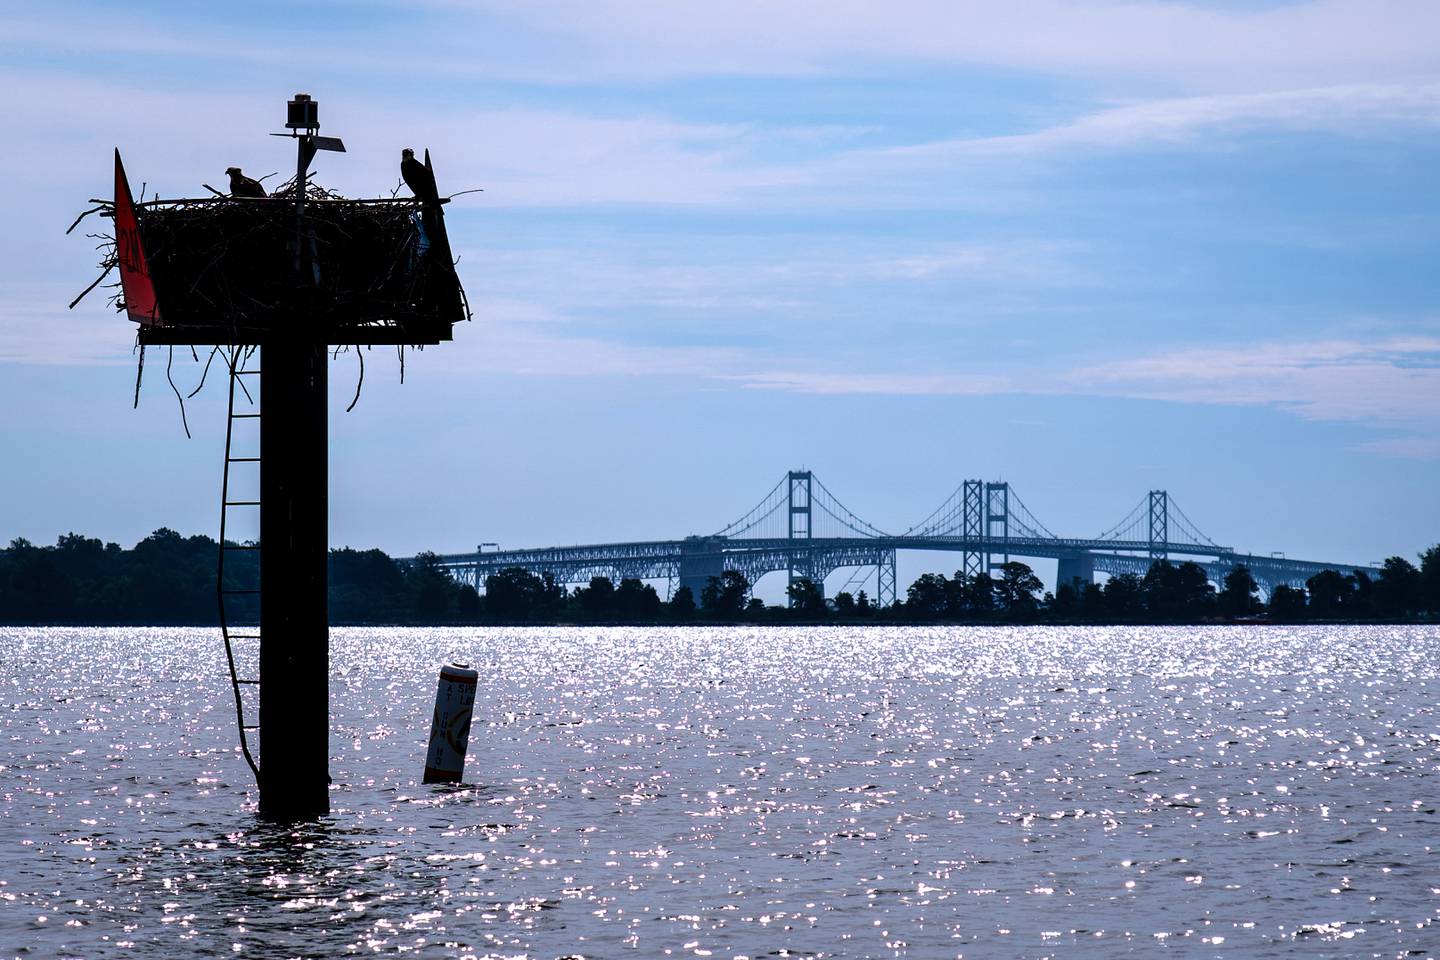 An osprey nest perched on a navigation pole in the Severn River, with Chesapeake Bay bridge in the background, as seen from Greenbury Point in Annapolis.